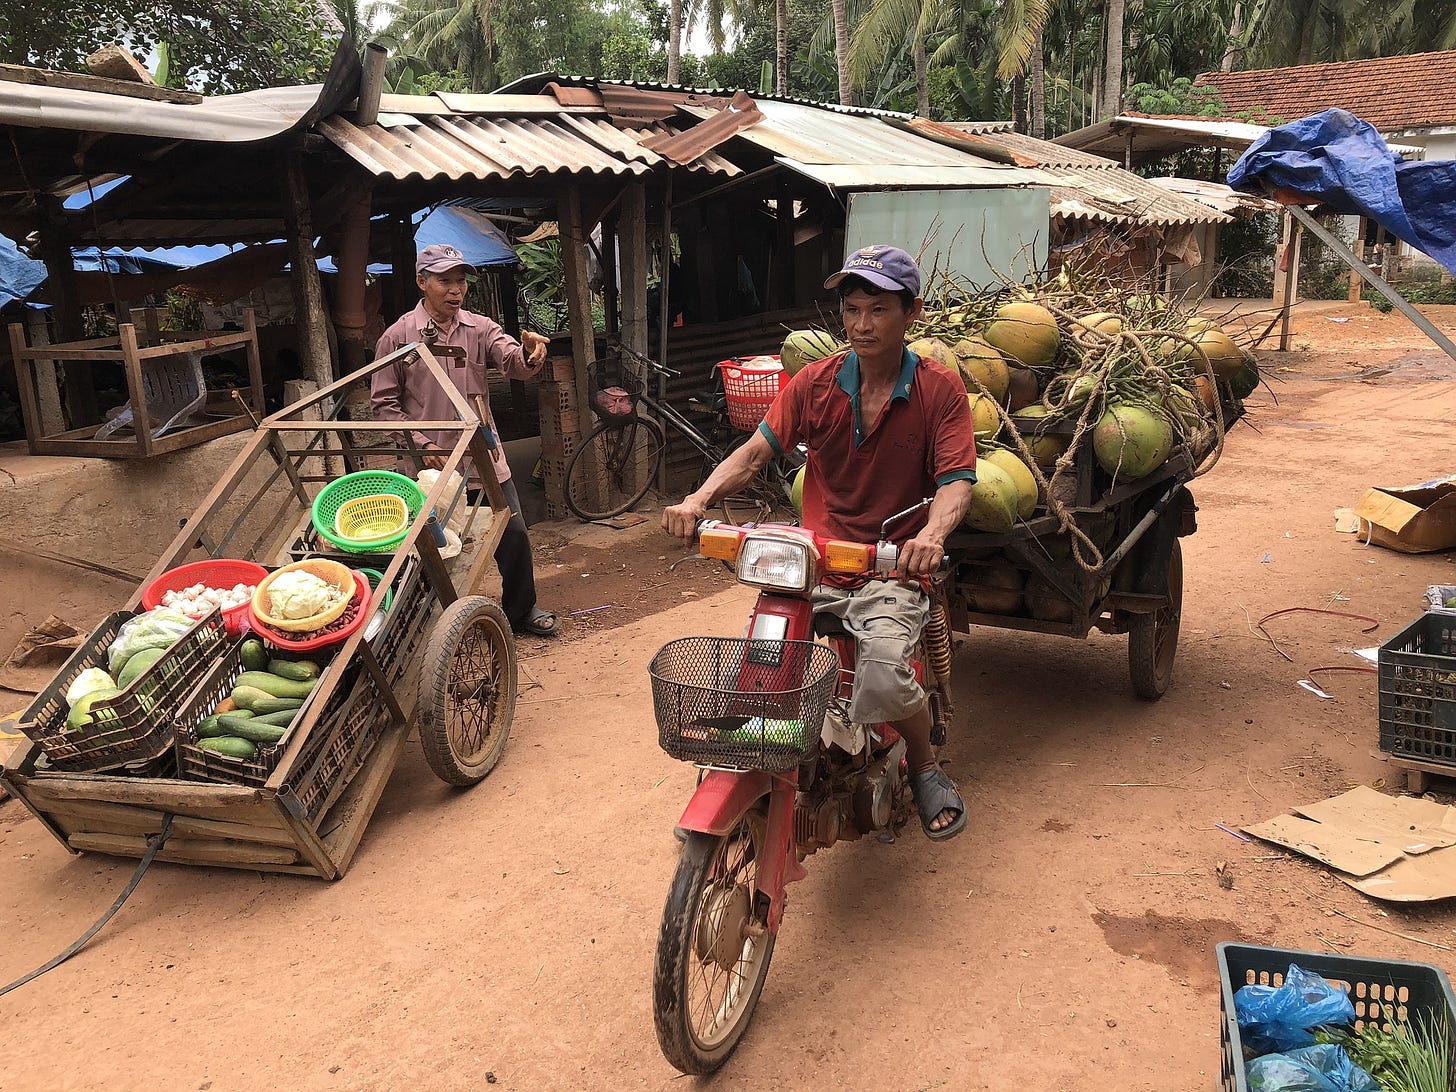 Two men with food delivery. One with a hand cart full of fresh vegetables; the other on a scooter with a trailer full of what looks like melons. No packaged food in sight.